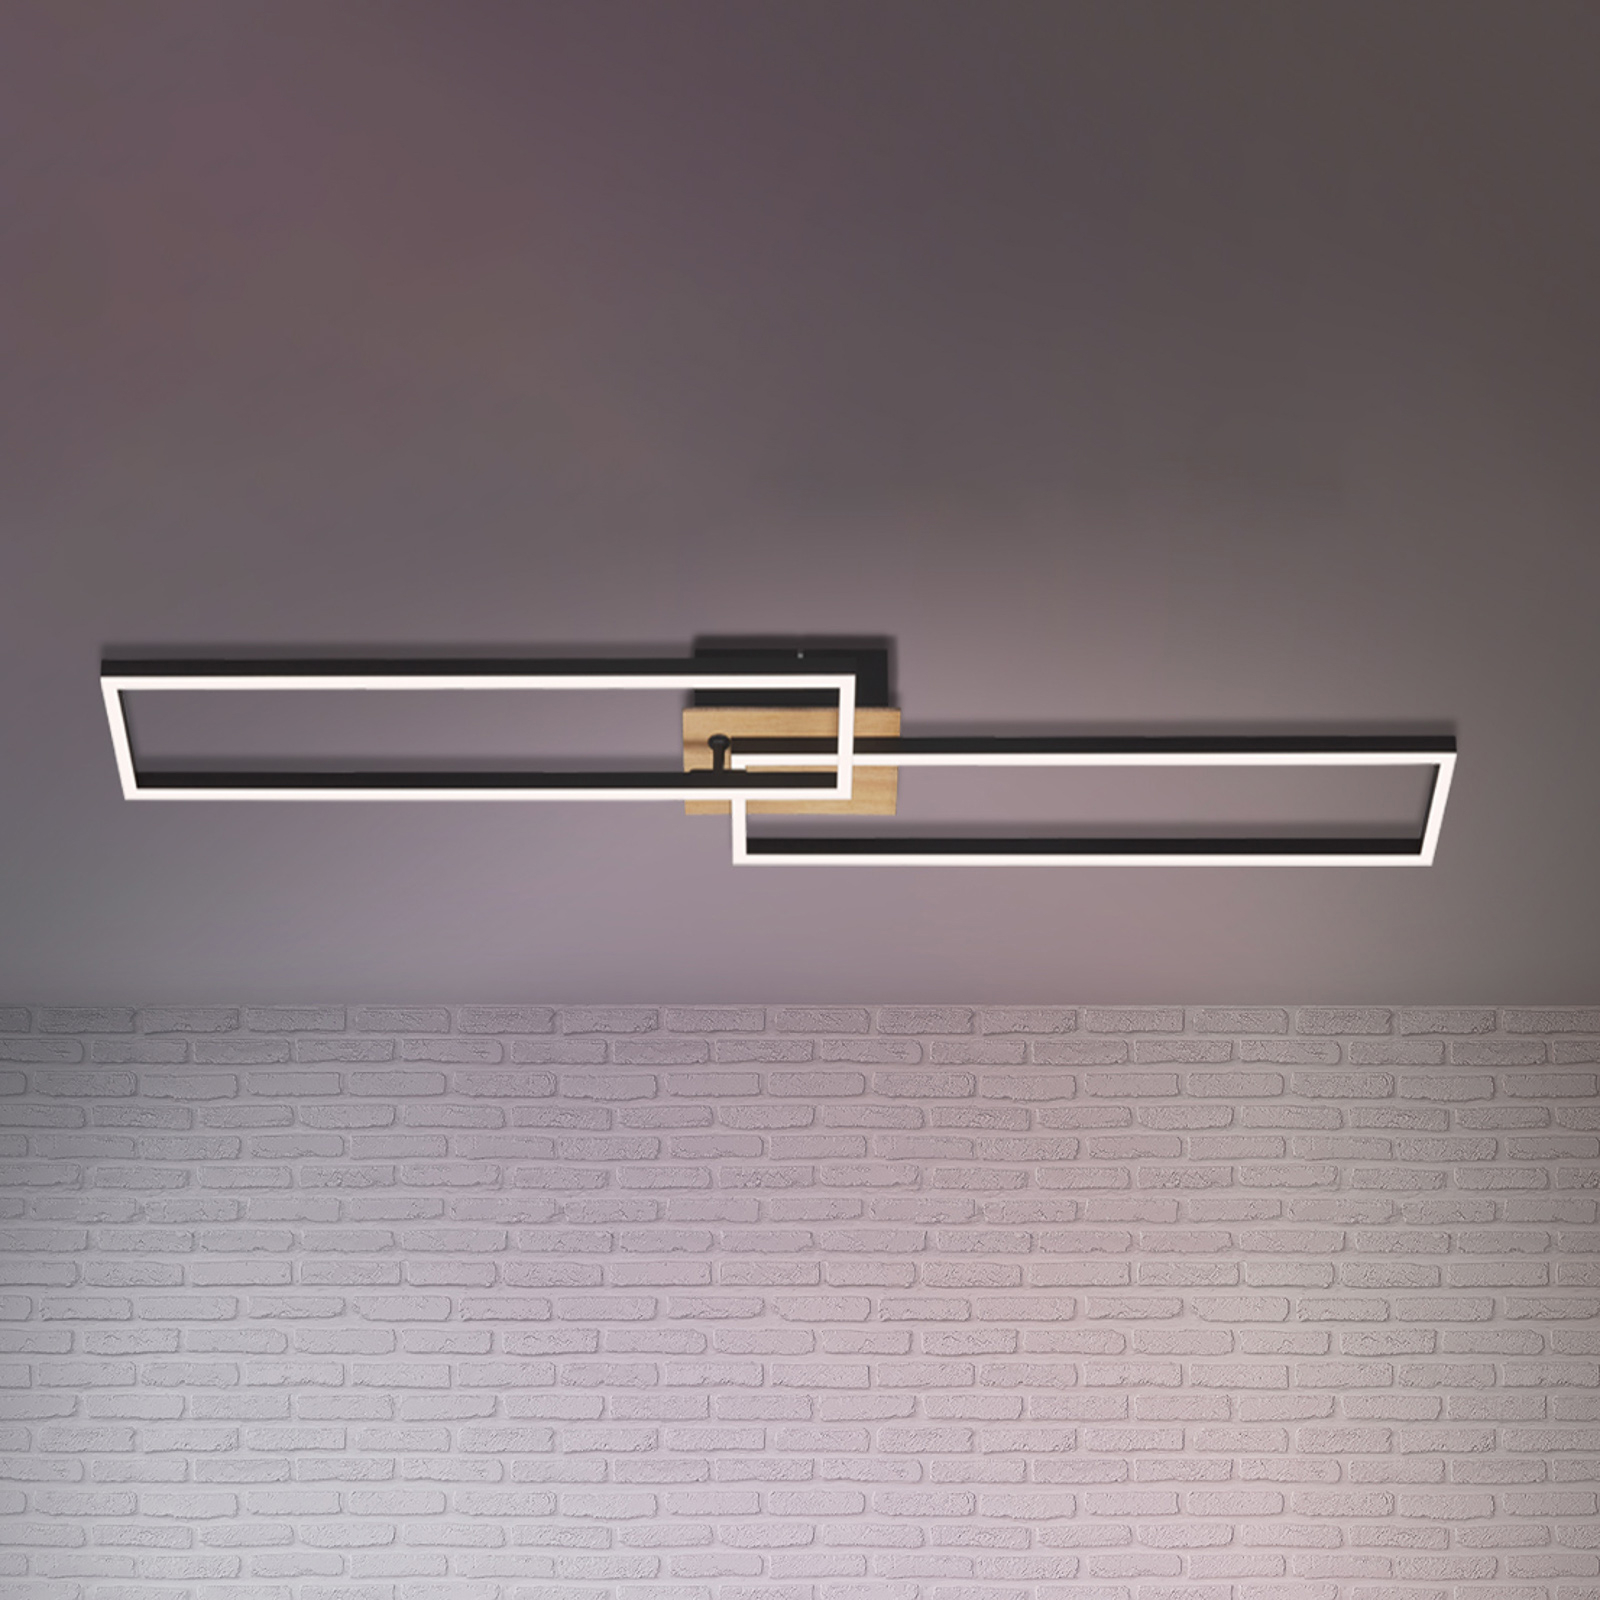 3,145-014 LED ceiling light with remote control